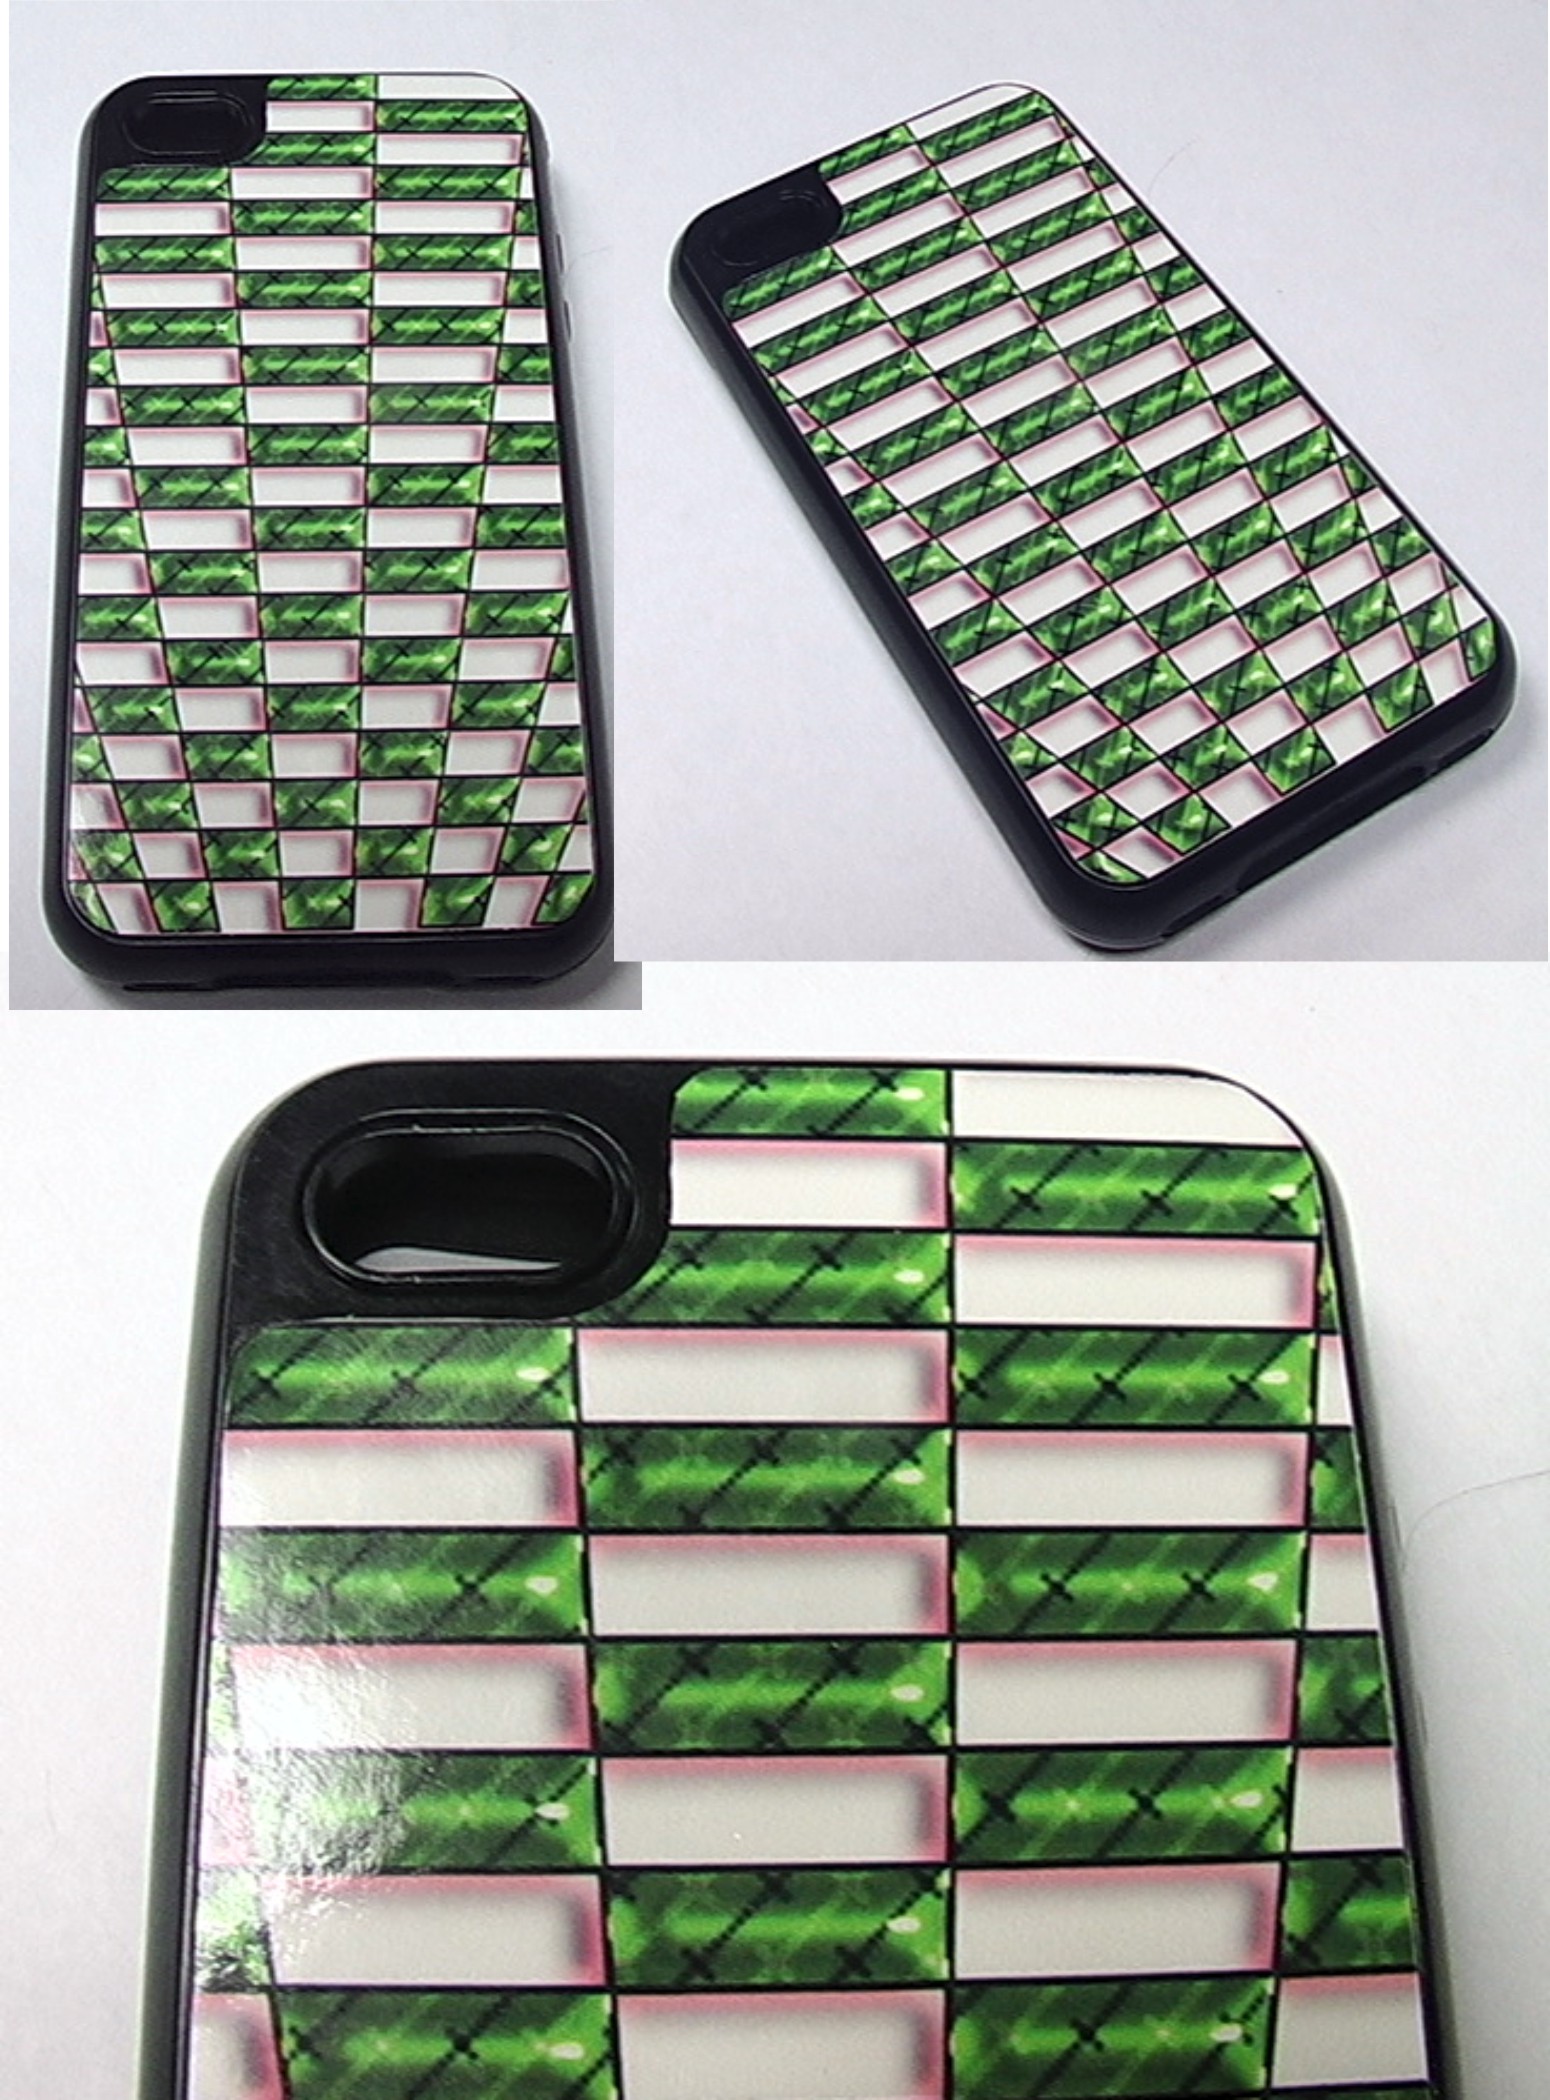 Perspective Emerald 4/4s cover made with sublimation printing